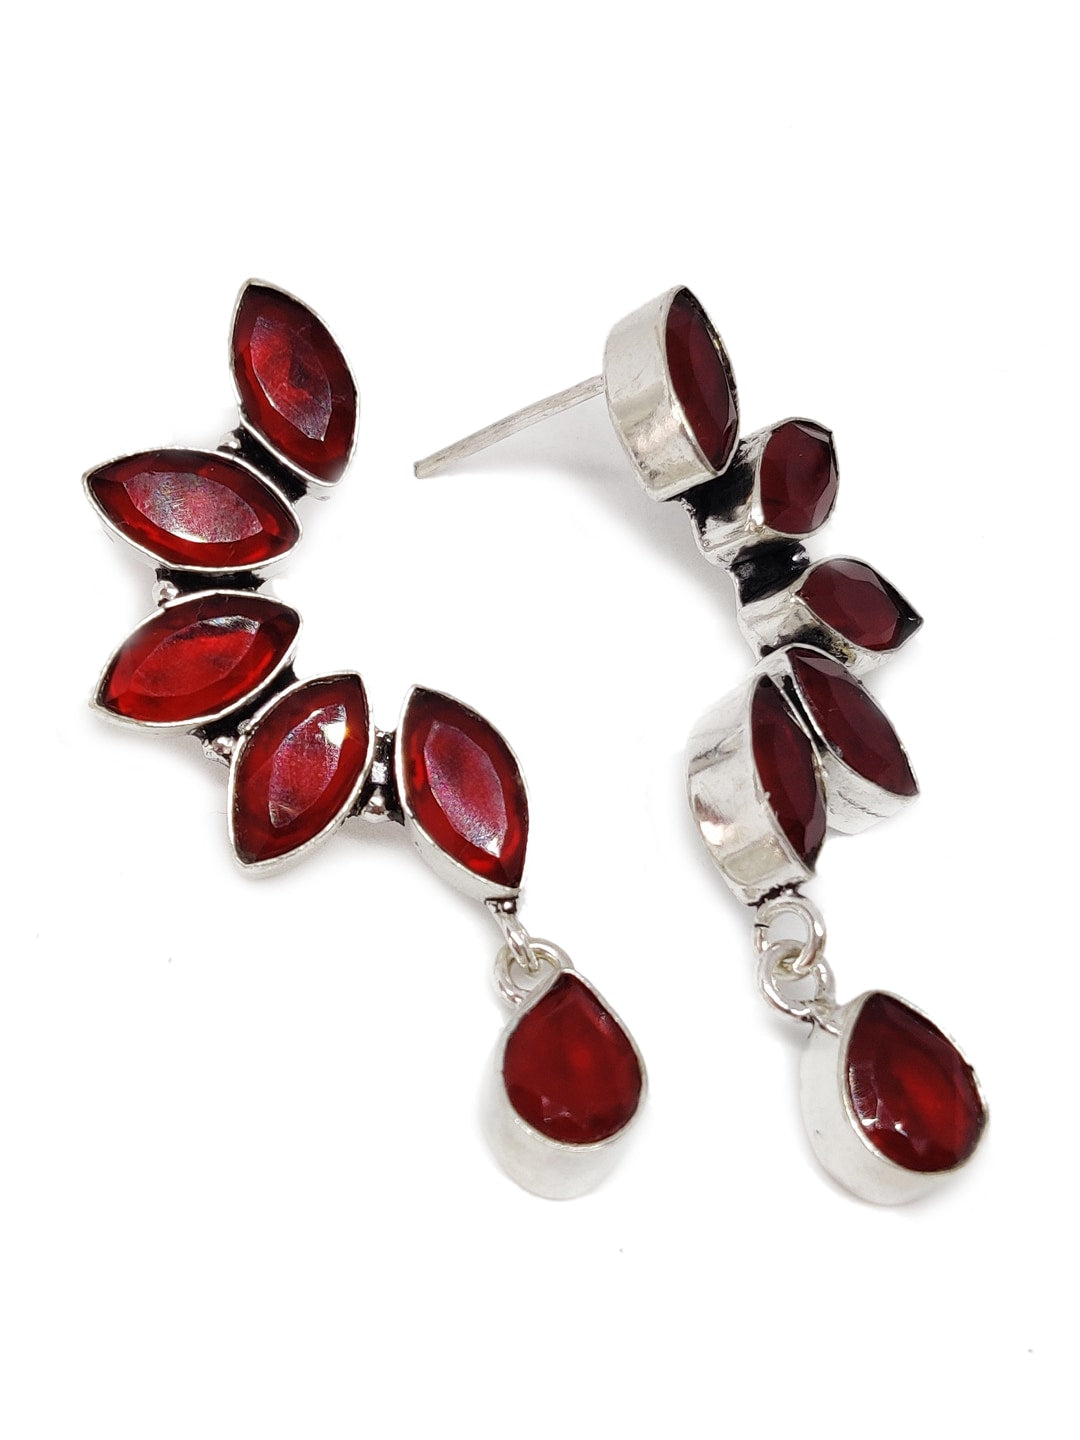 EL REGALO Silver-Toned & Red German Silver Floral Drop Earrings - for Women and Girls
Style ID: 16770262